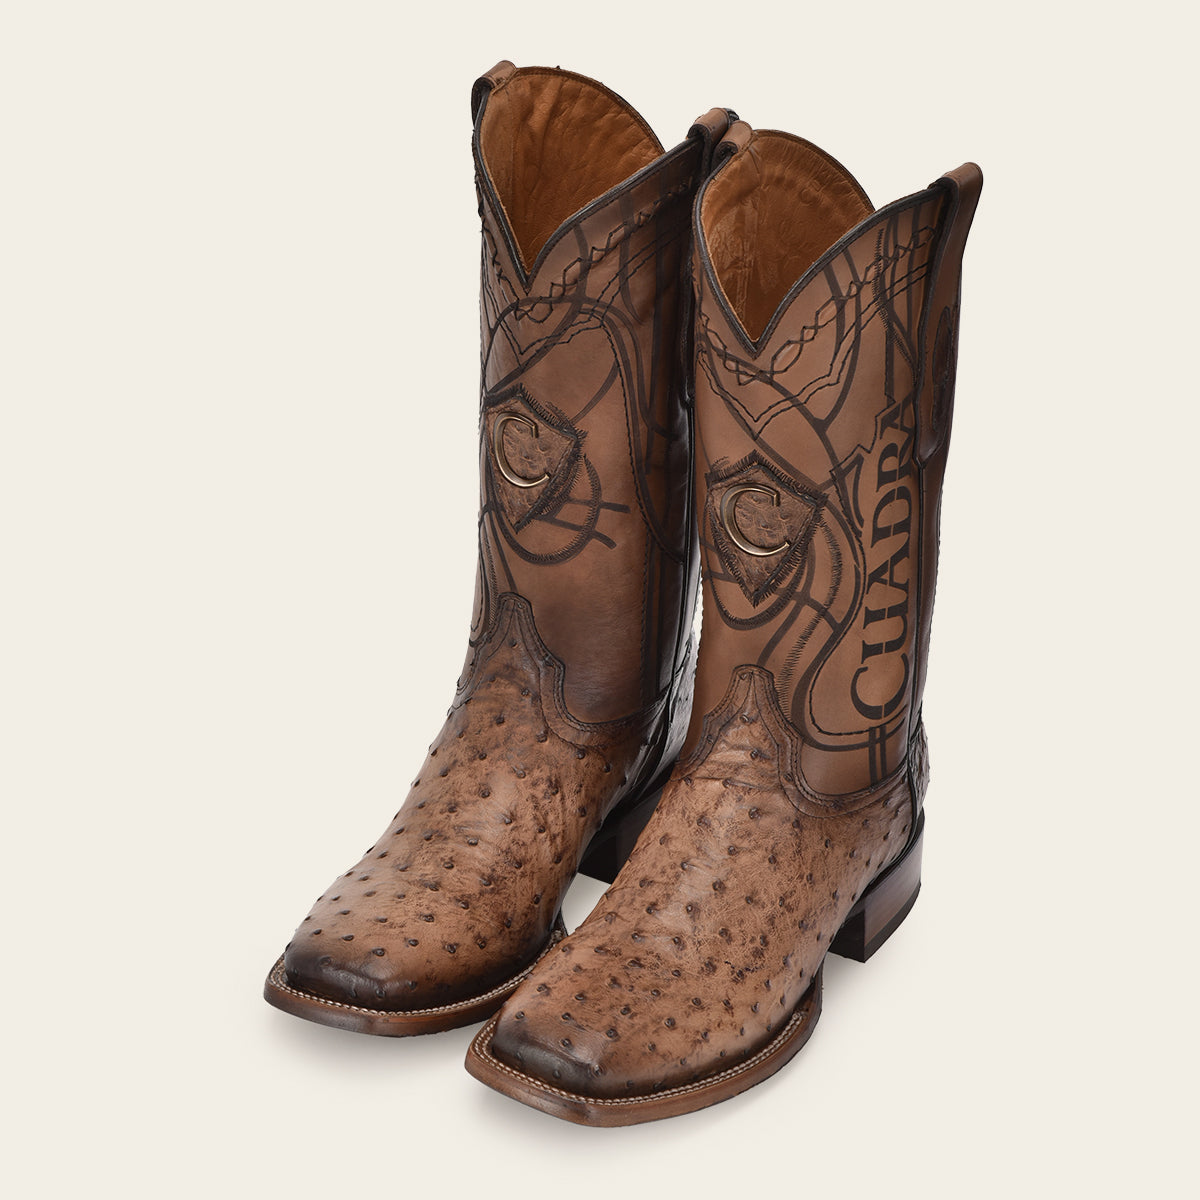 Engraved honey exotic leather boot